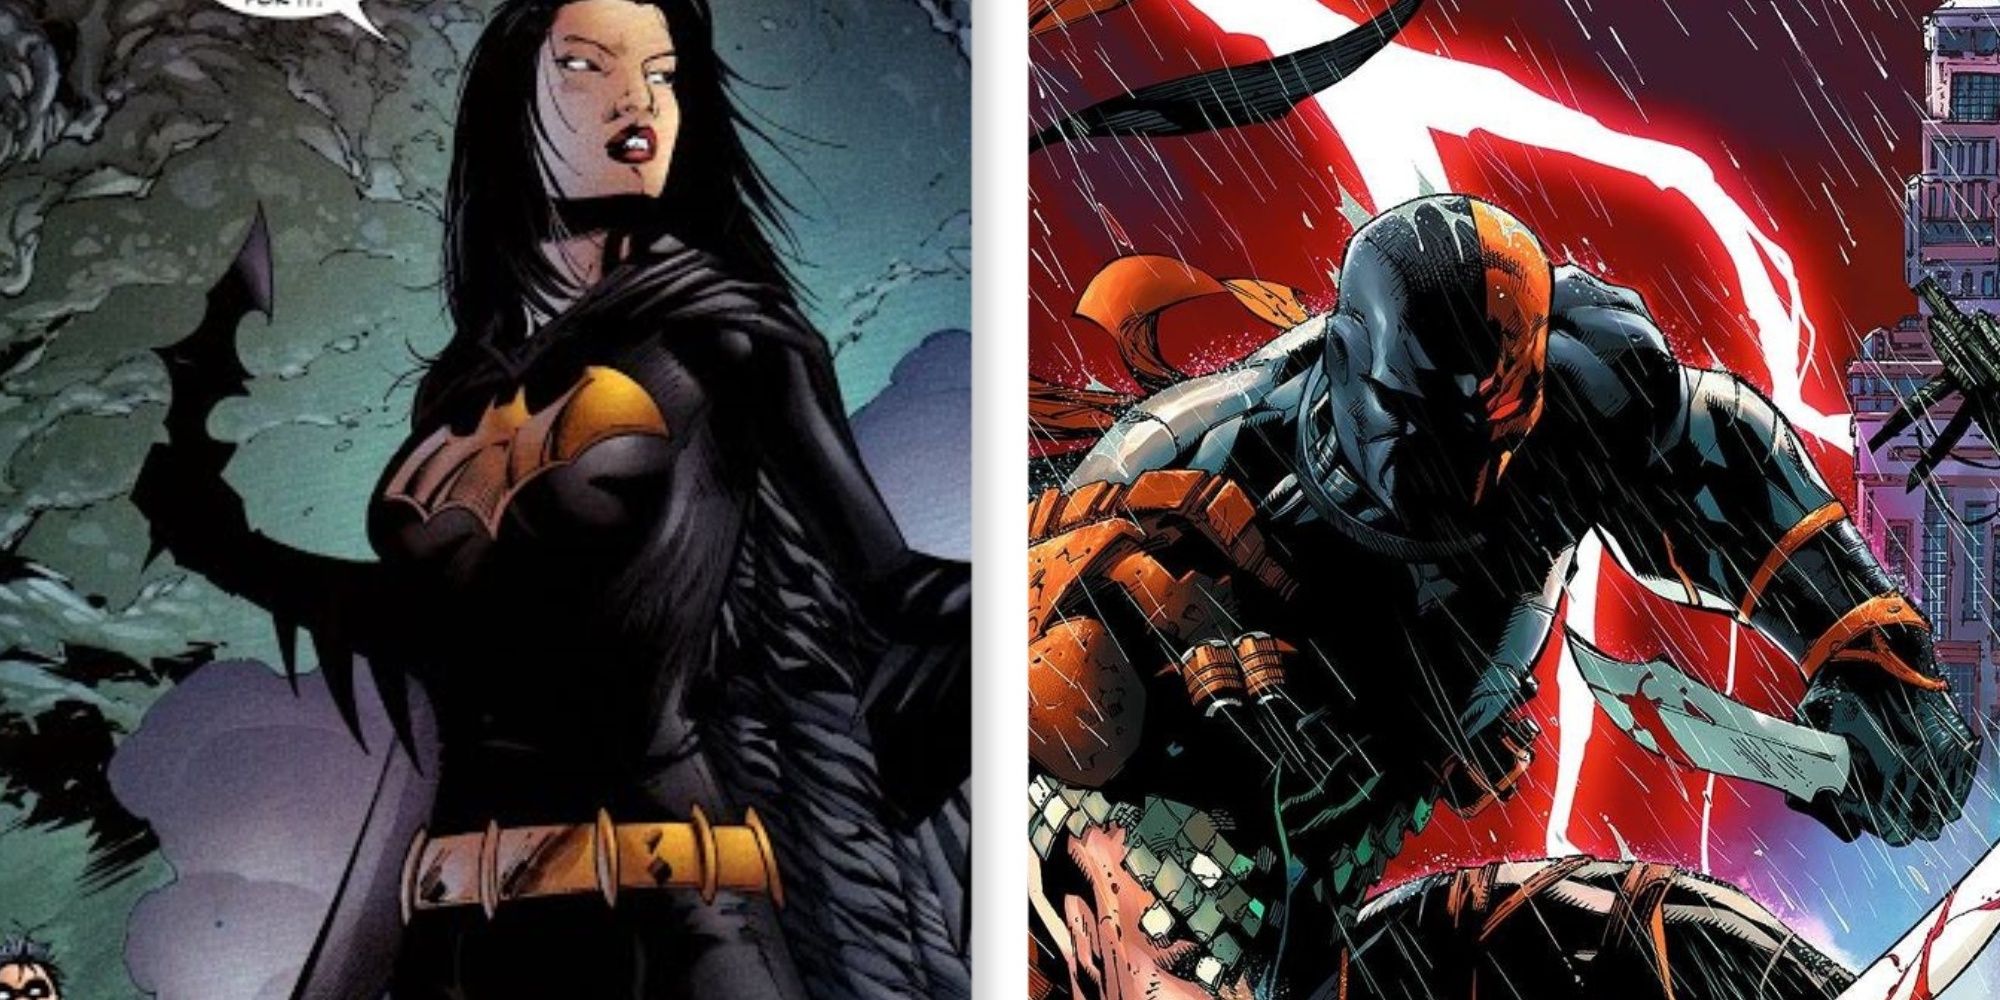 A split image of Batgirl Cassandra Cain and Deathstroke in DC Comics